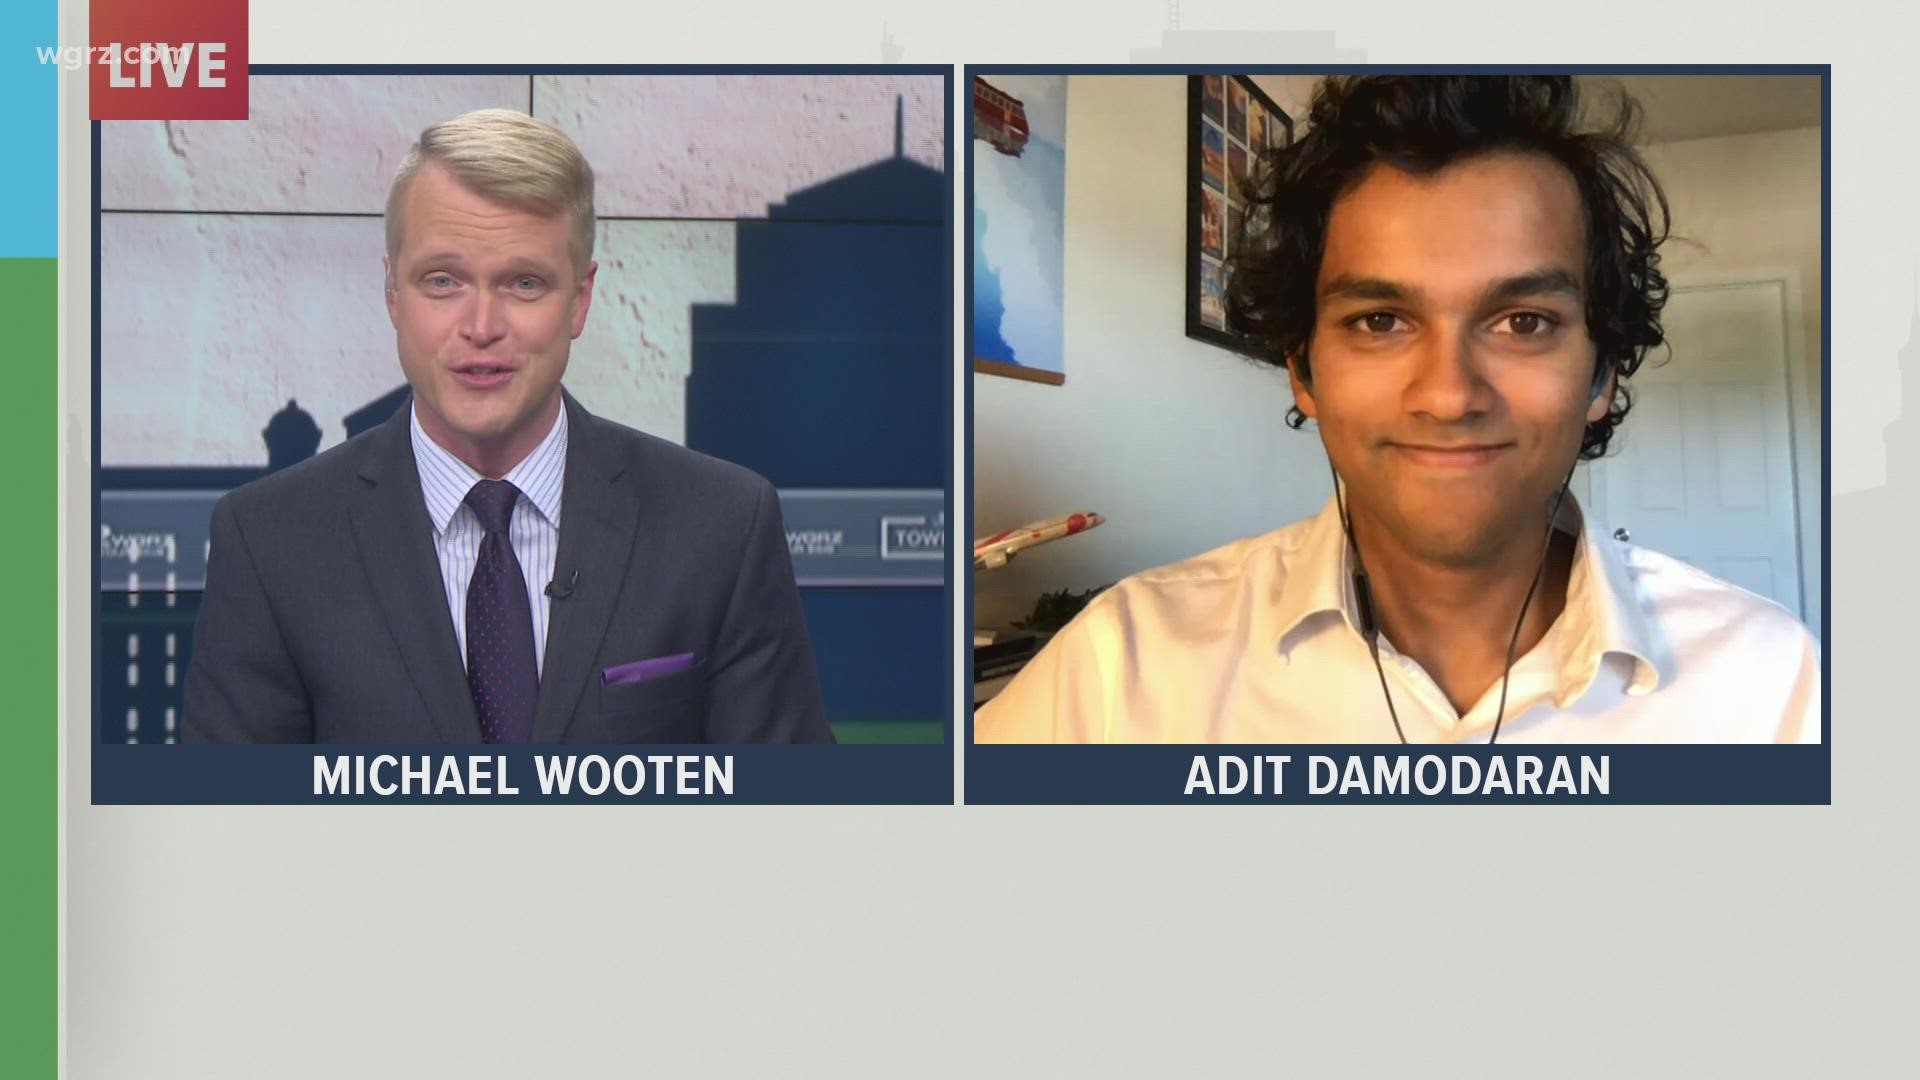 Adit Damodaran He's an economist with Hopper, and joins our town hall to discuss the best deals in travel.